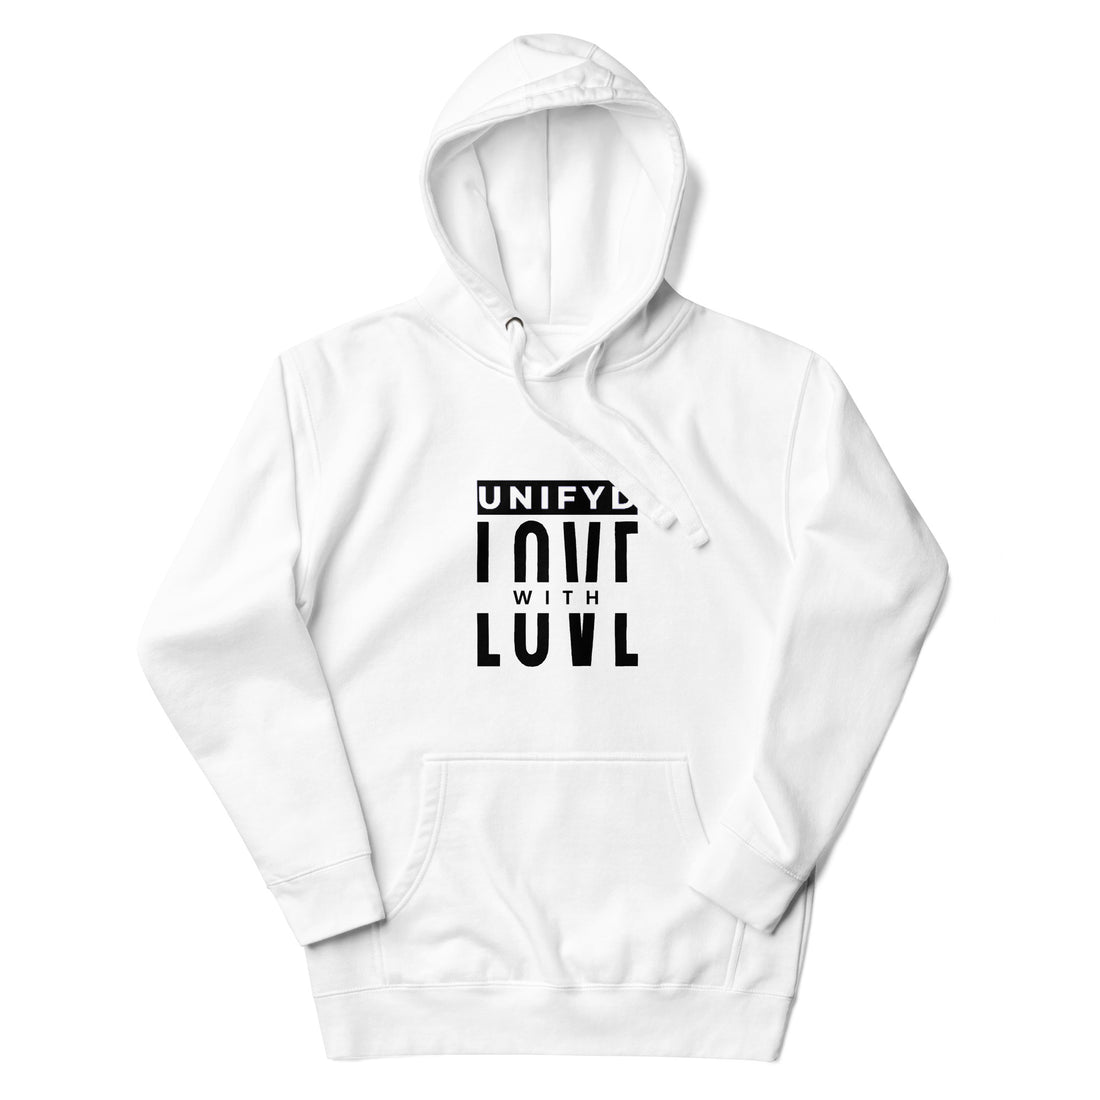 UNIFYD with Love Hoodie